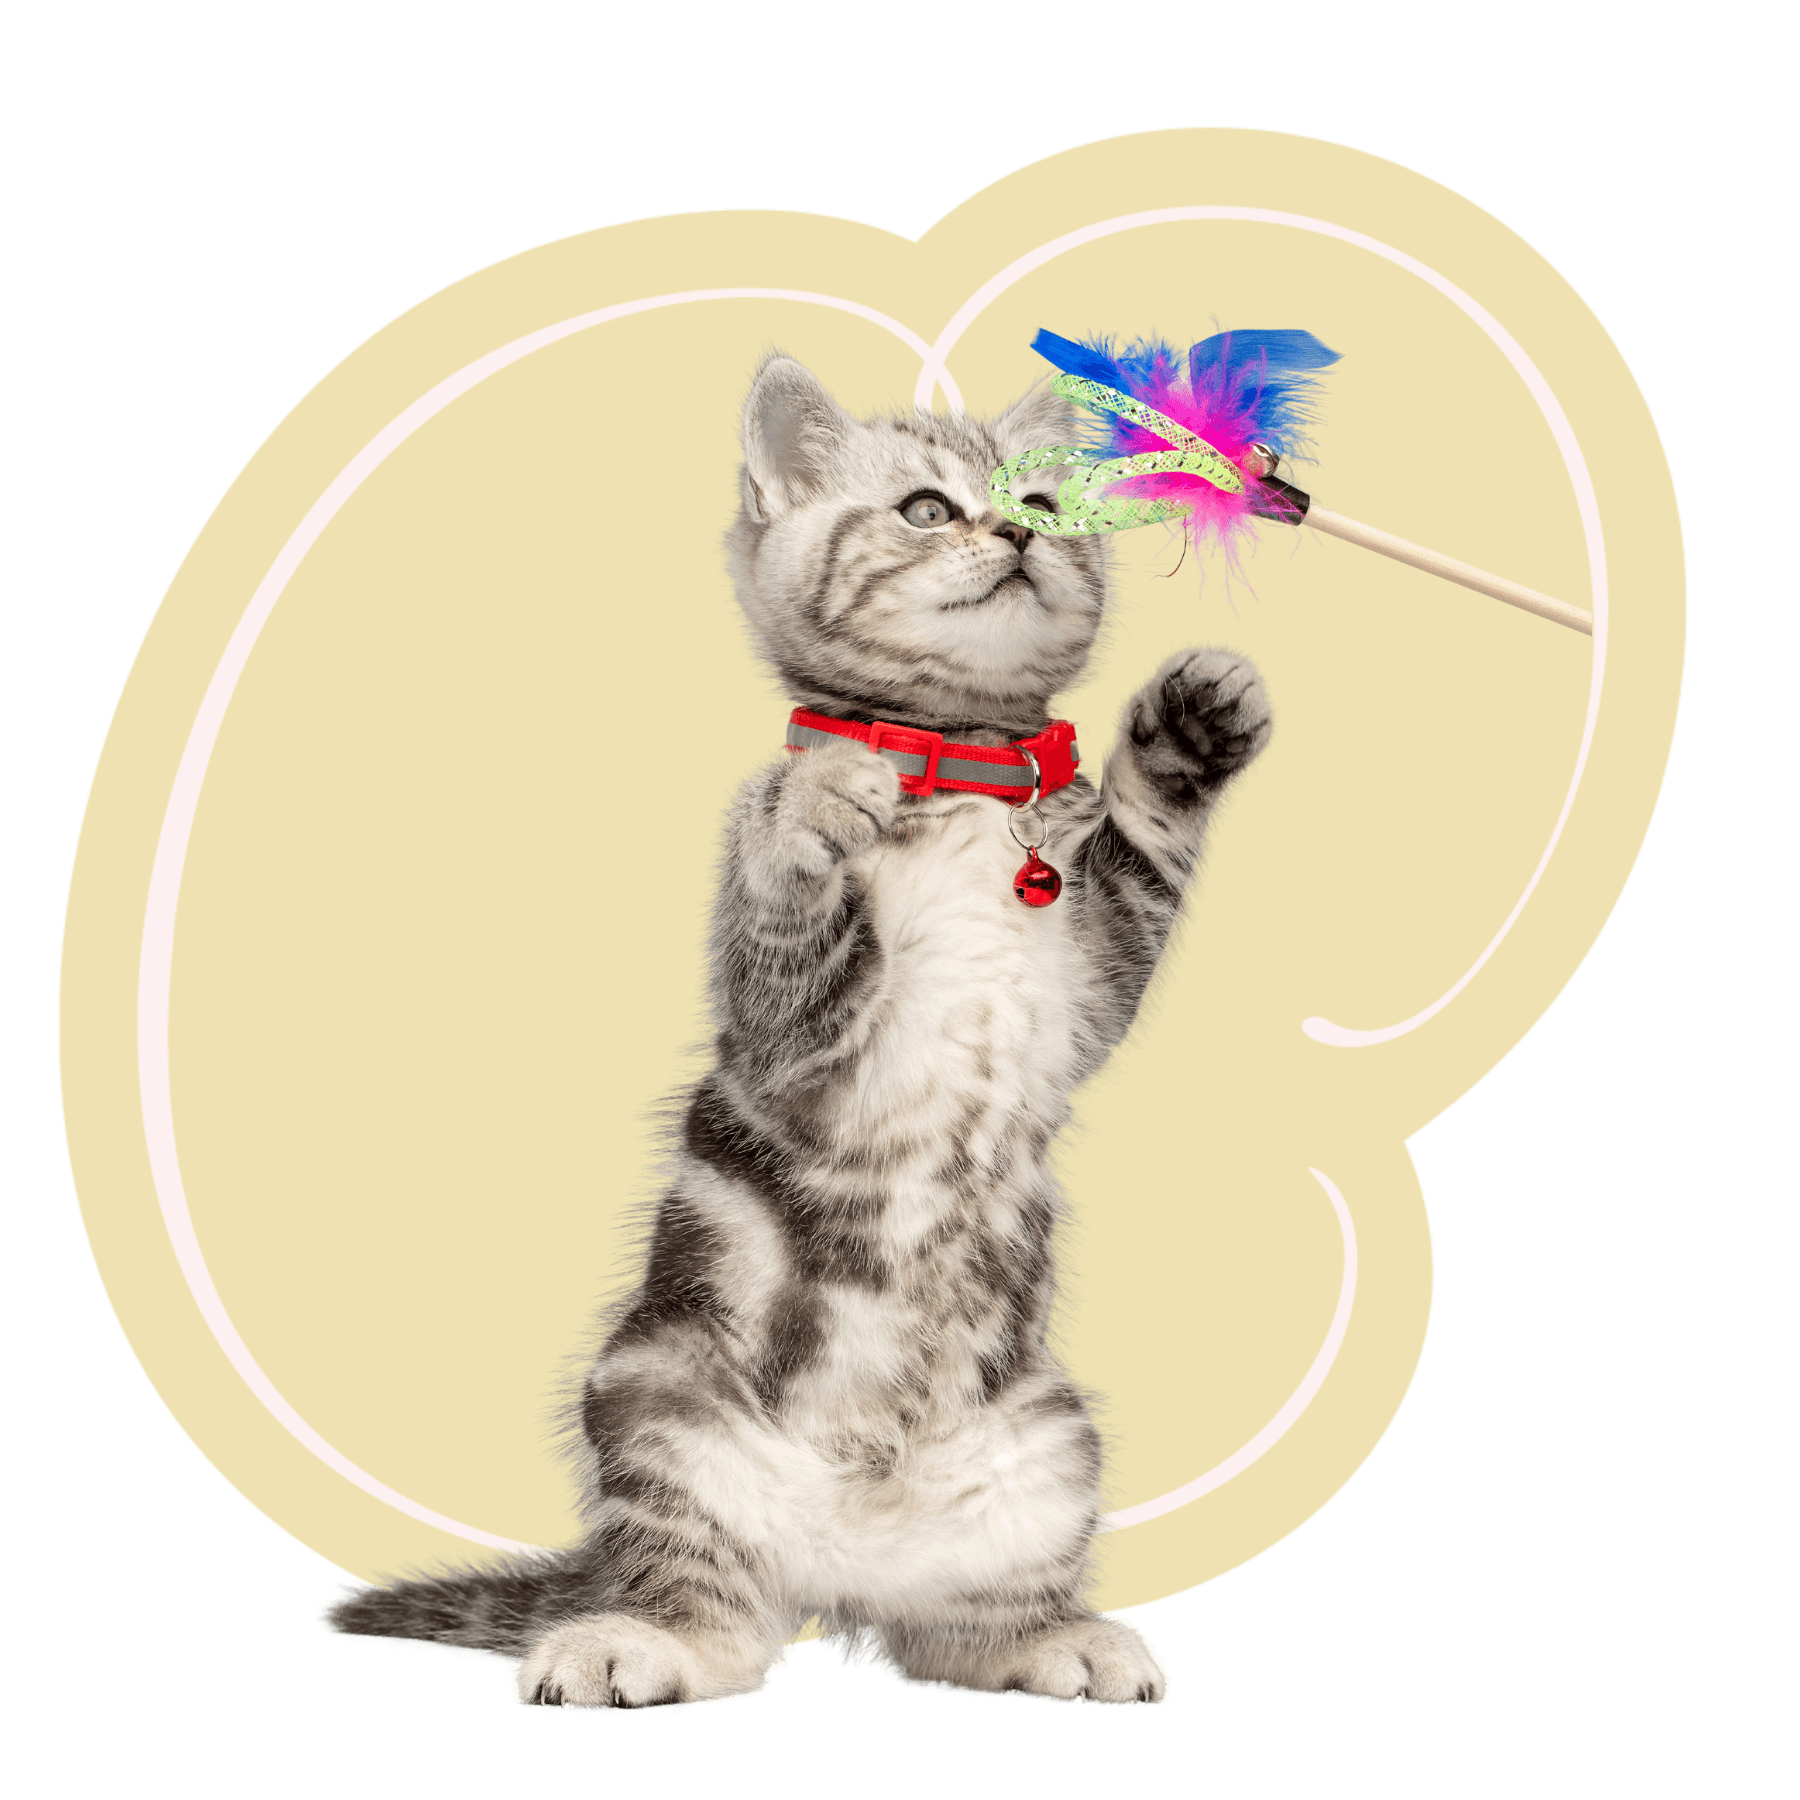 kitten playing with feather<br />
